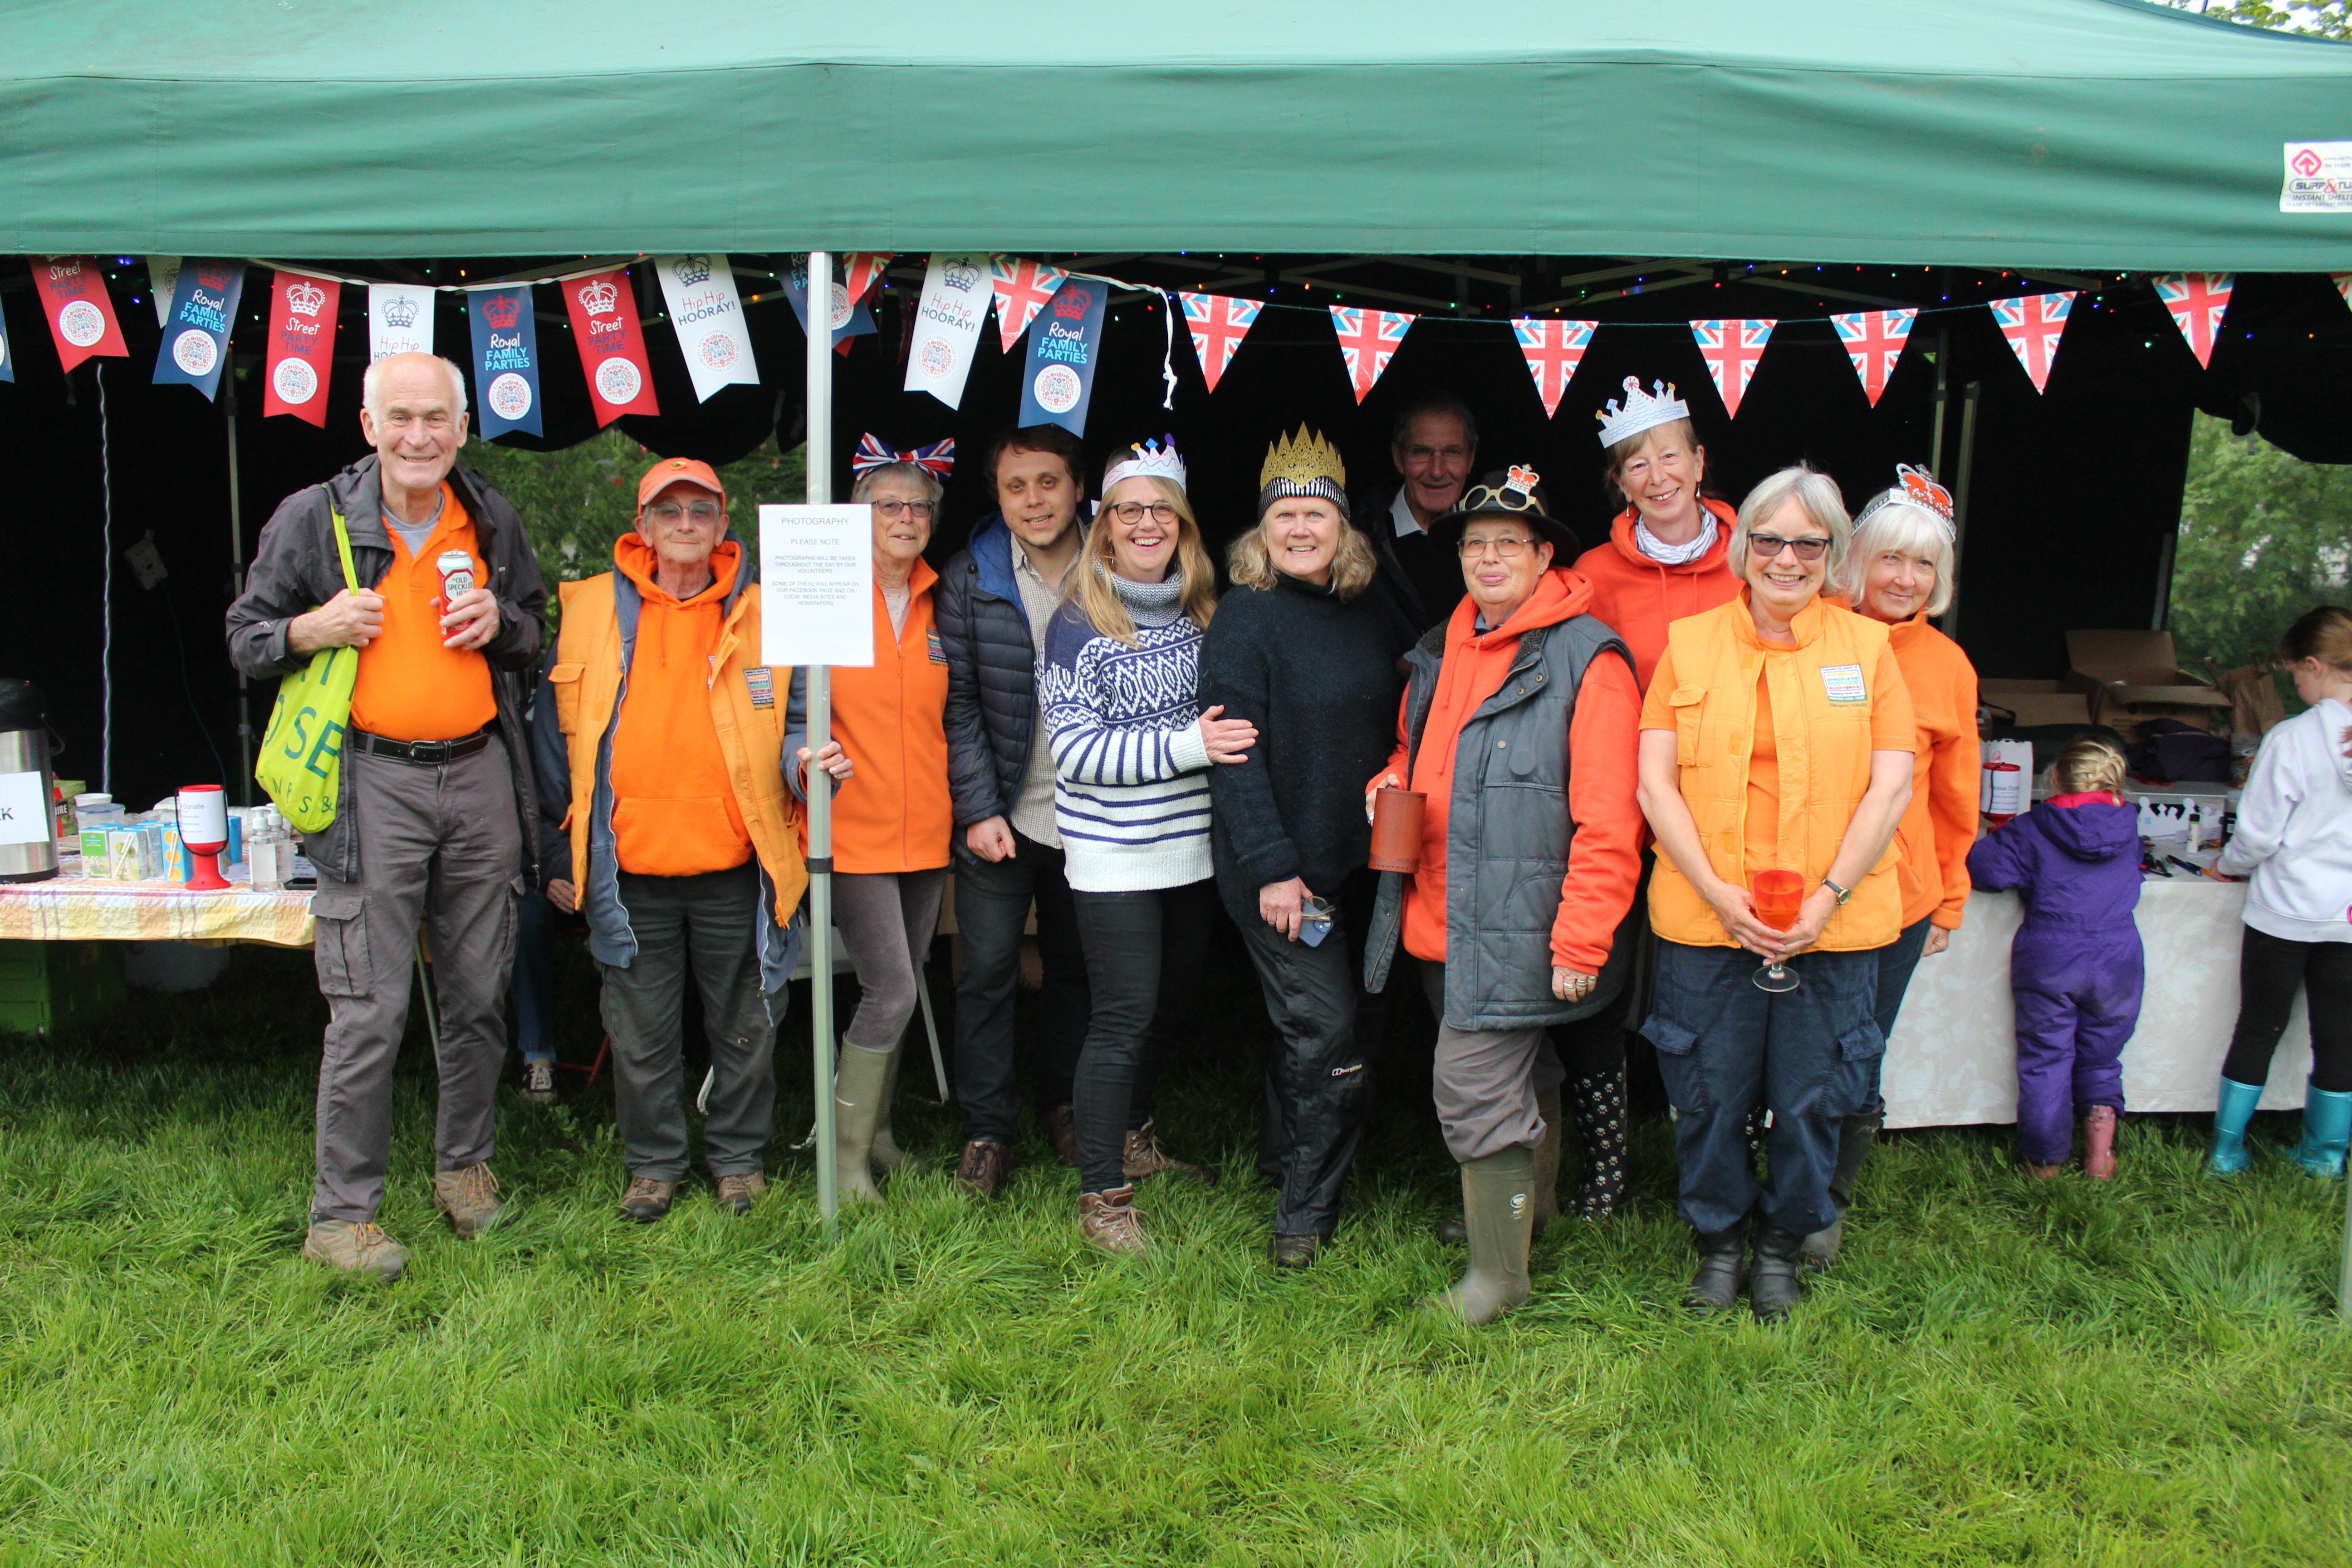 Volunteers from the Allington Hillbillies at their party at Coopers Field